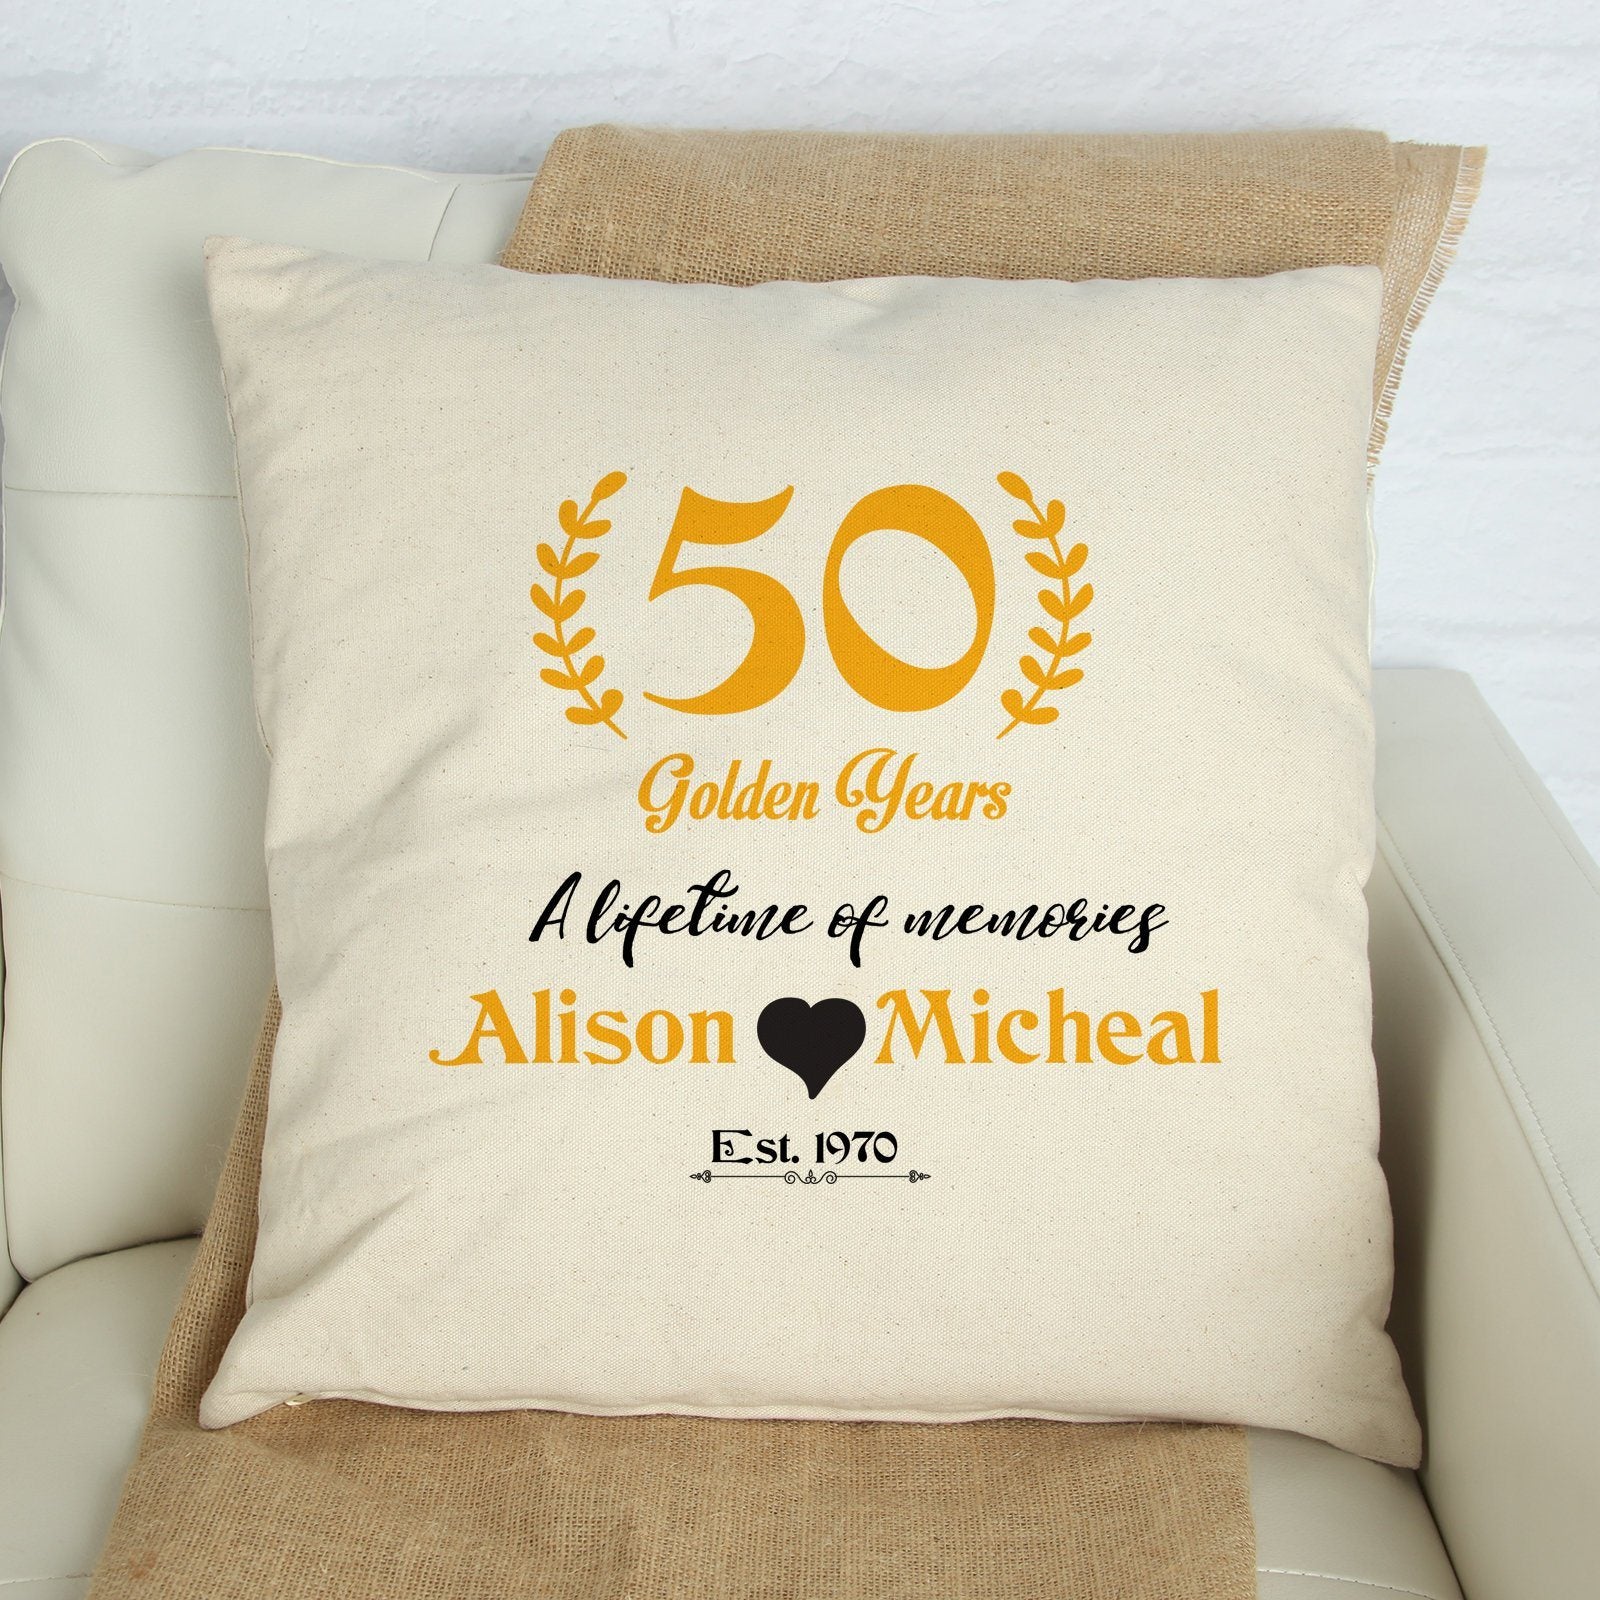 50 golden years cushion cover, Personalised wedding anniversary gift